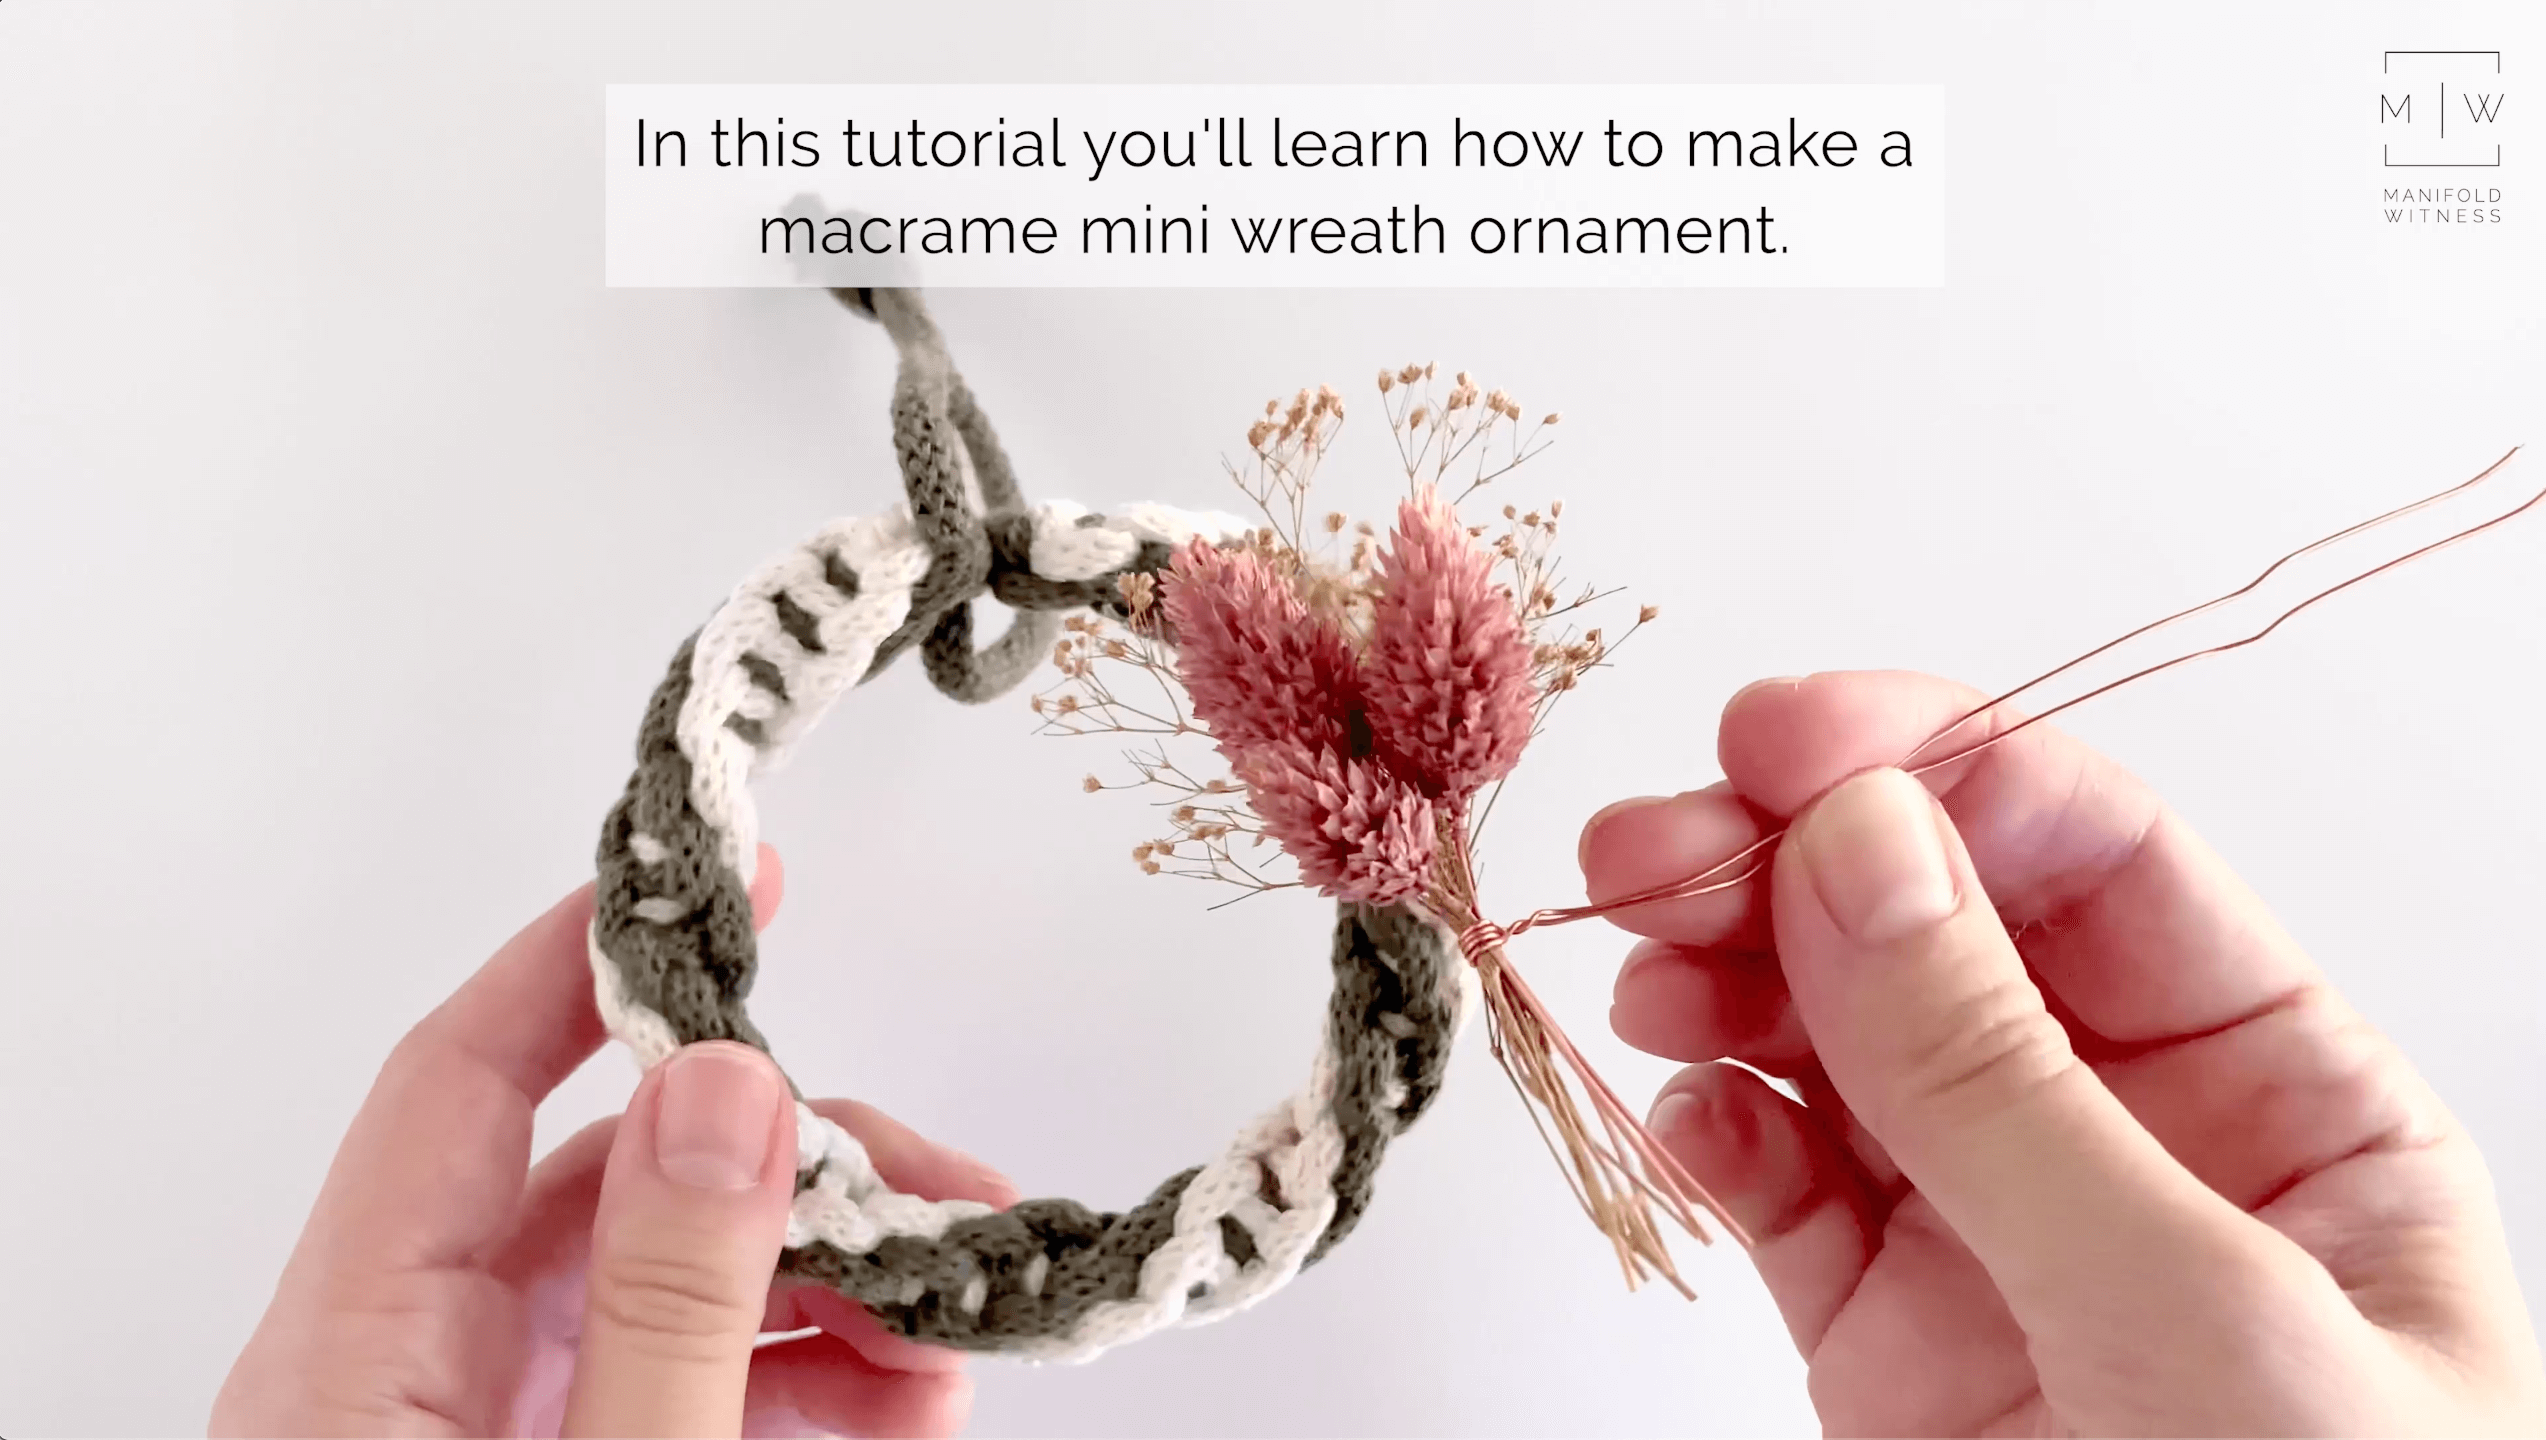 Load video: Step-by-step tutorial for making a macrame mini wreath ornament